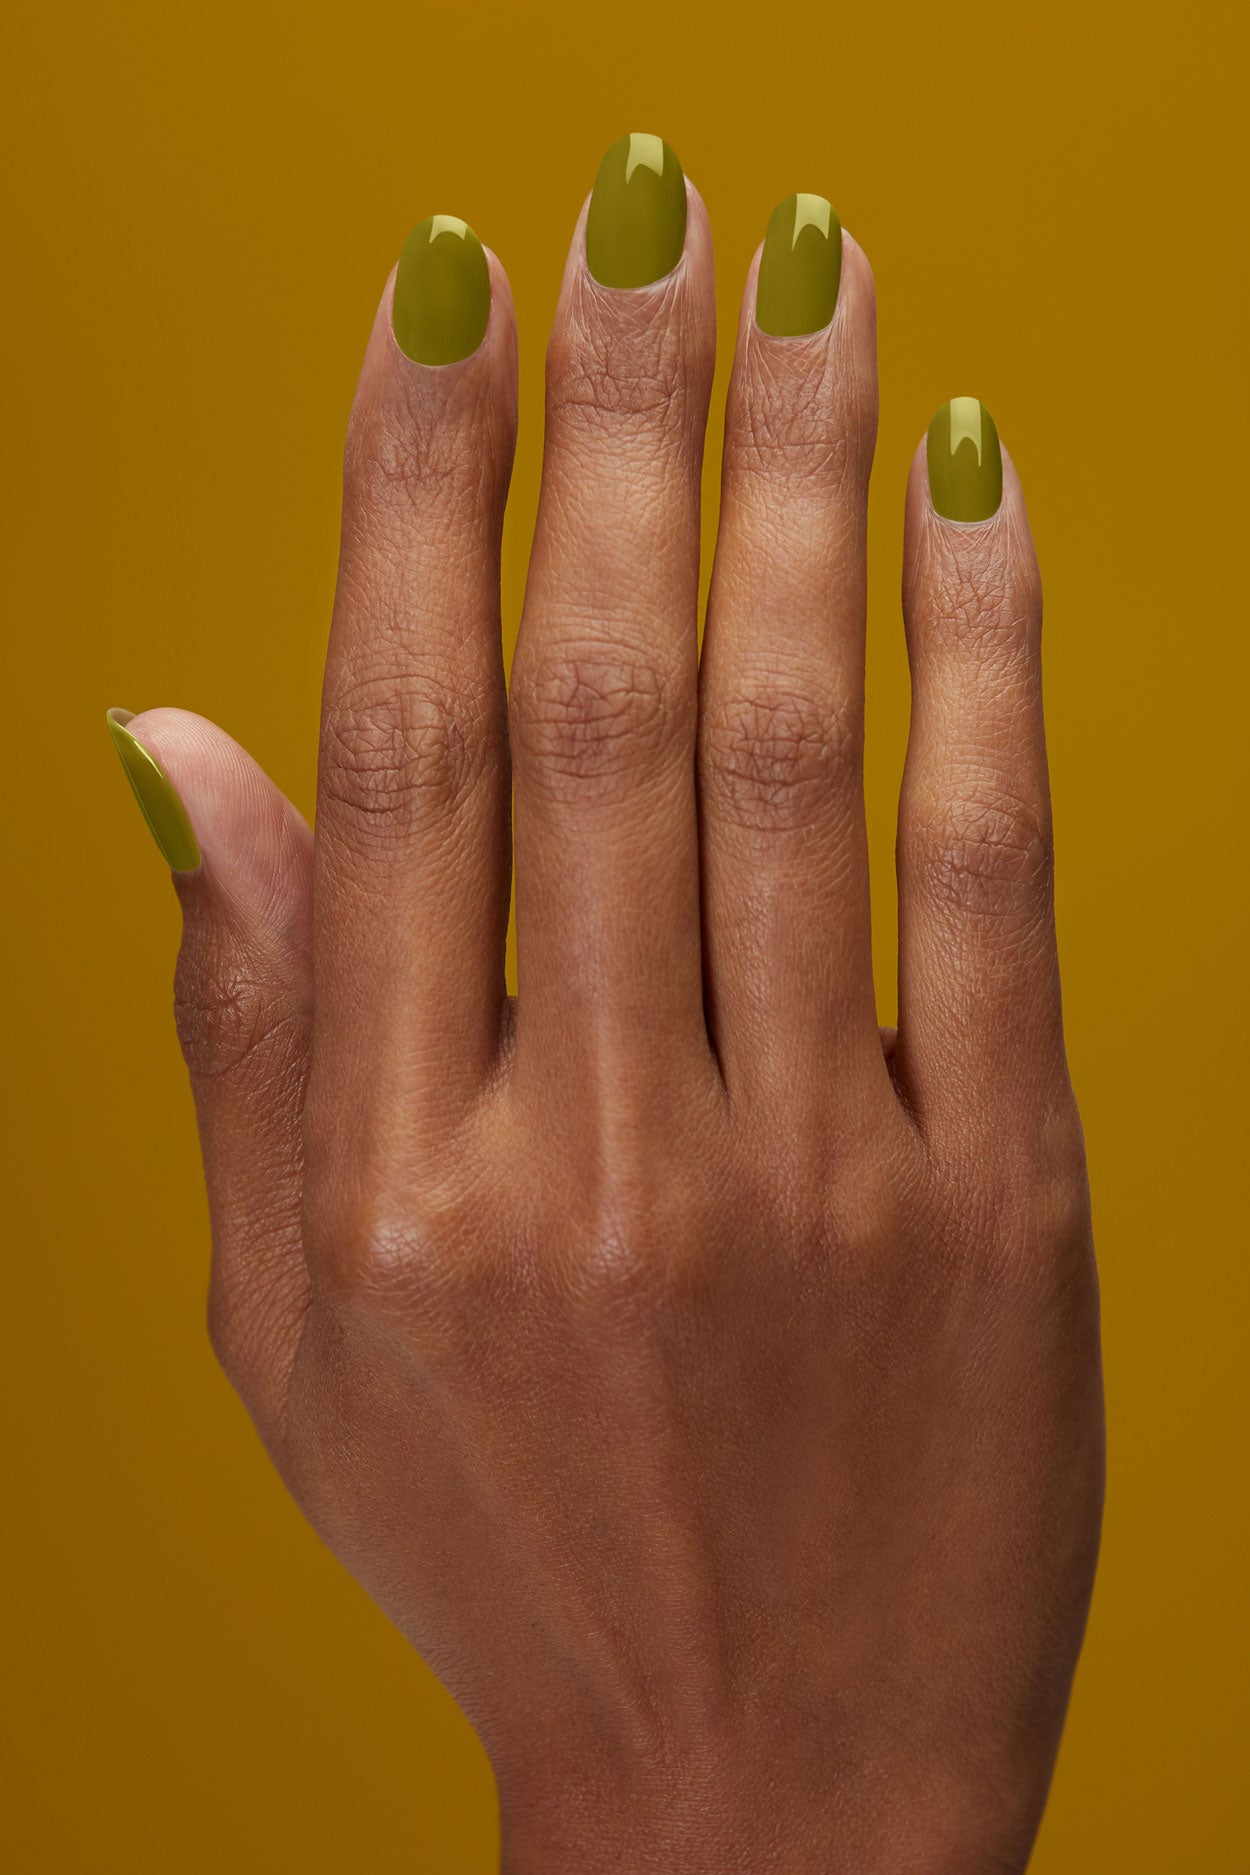 23 Olive Green Nails That Are Perfect for Fall - StayGlam | Olive nails,  Green acrylic nails, Green nails